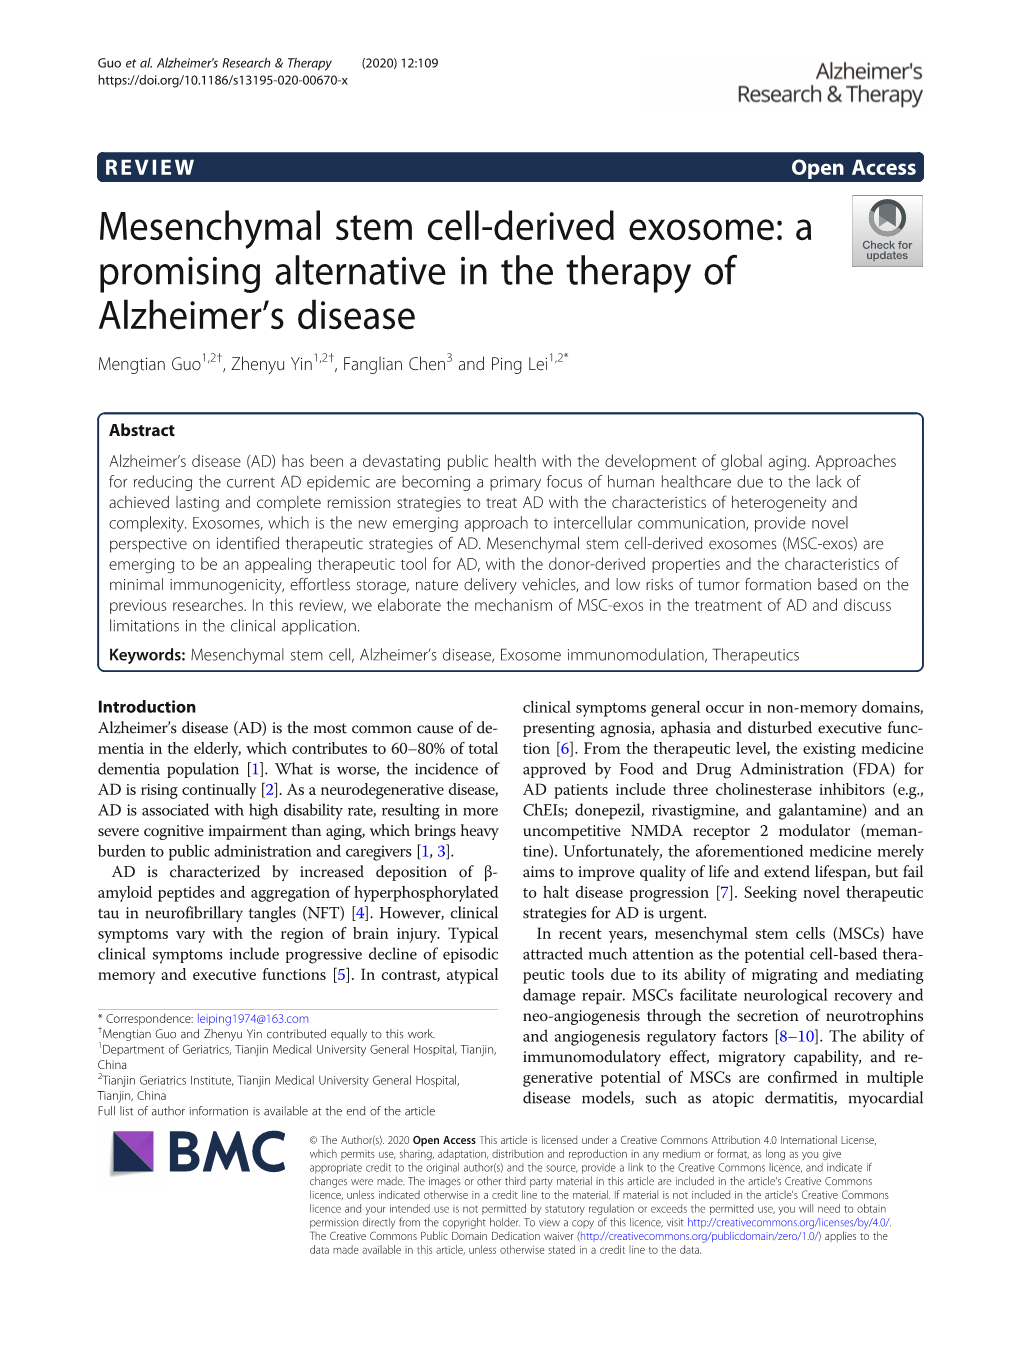 Mesenchymal Stem Cell-Derived Exosome: a Promising Alternative in the Therapy of Alzheimer’S Disease Mengtian Guo1,2†, Zhenyu Yin1,2†, Fanglian Chen3 and Ping Lei1,2*